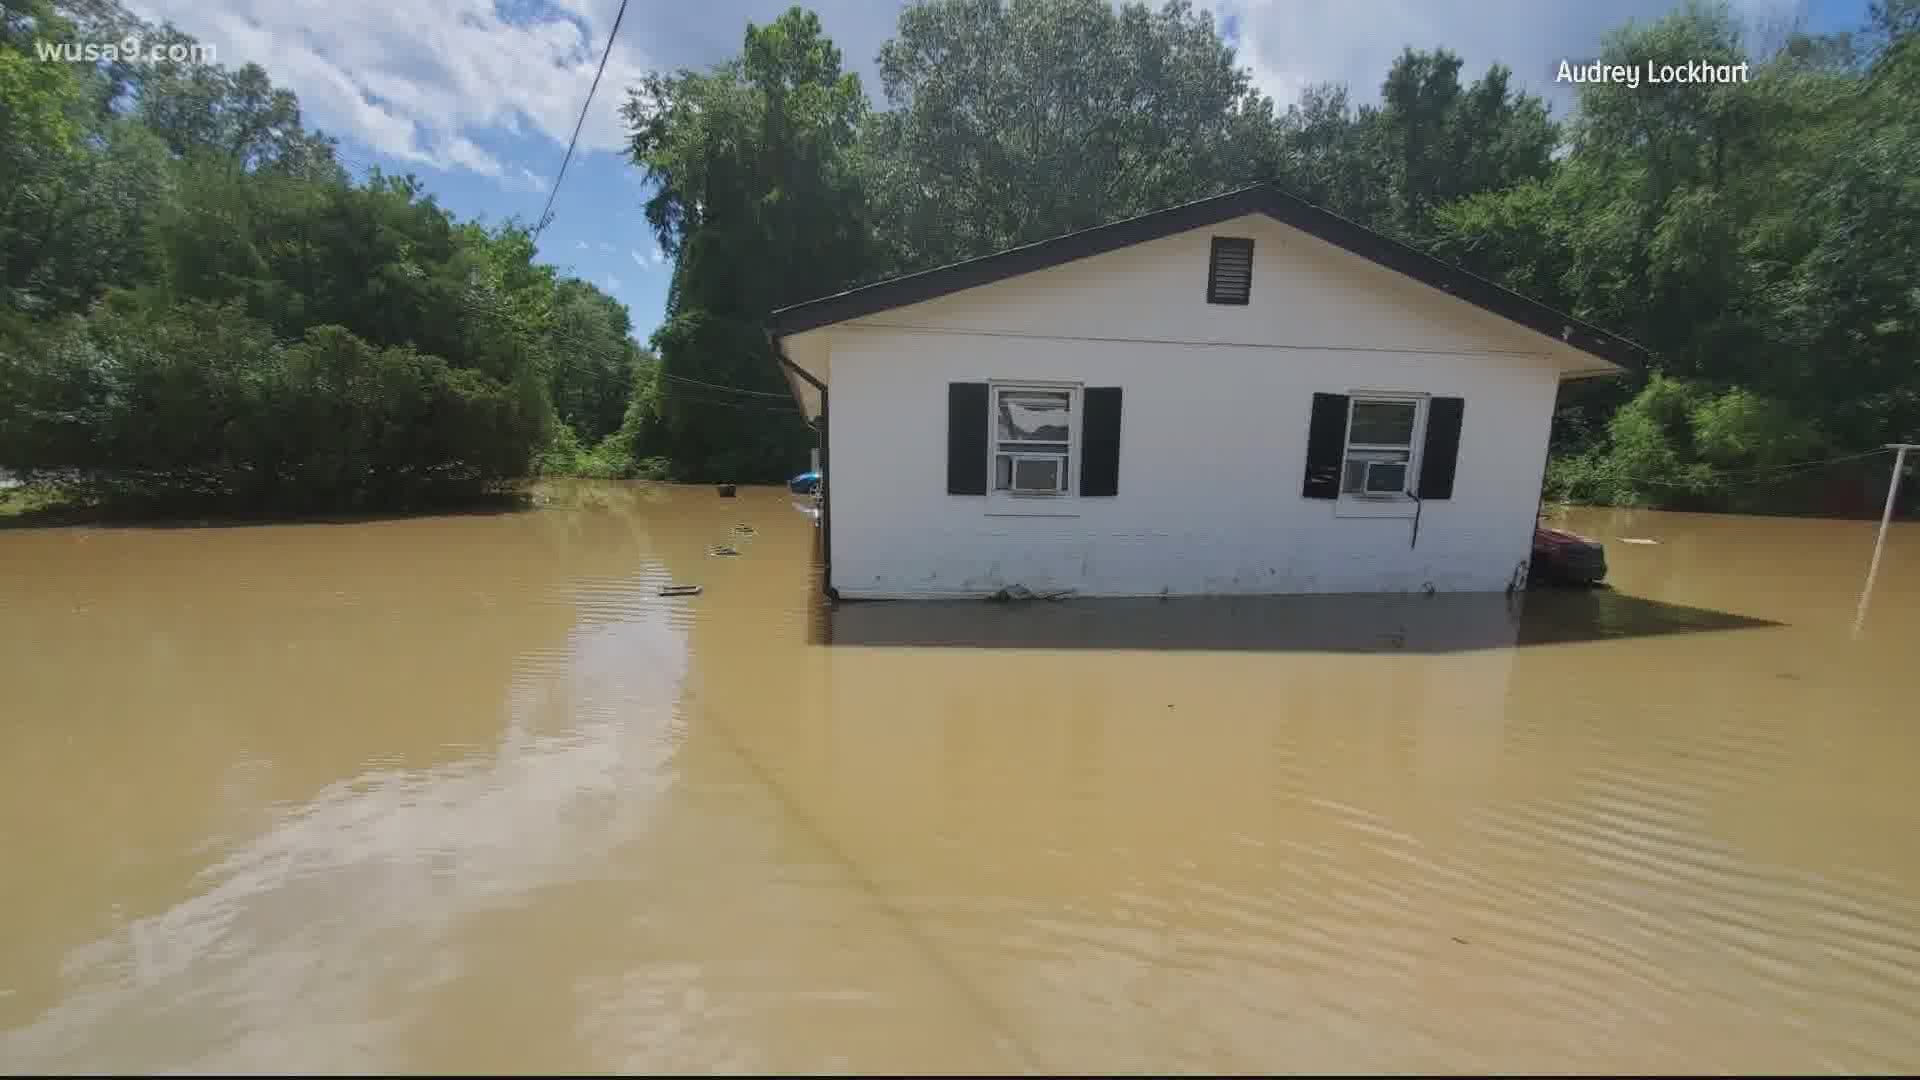 Audrey Lockhart's home was completely flooded by Tropical Storm Isaias. Now, the single mom of three needs help rebuilding before her kids start school.